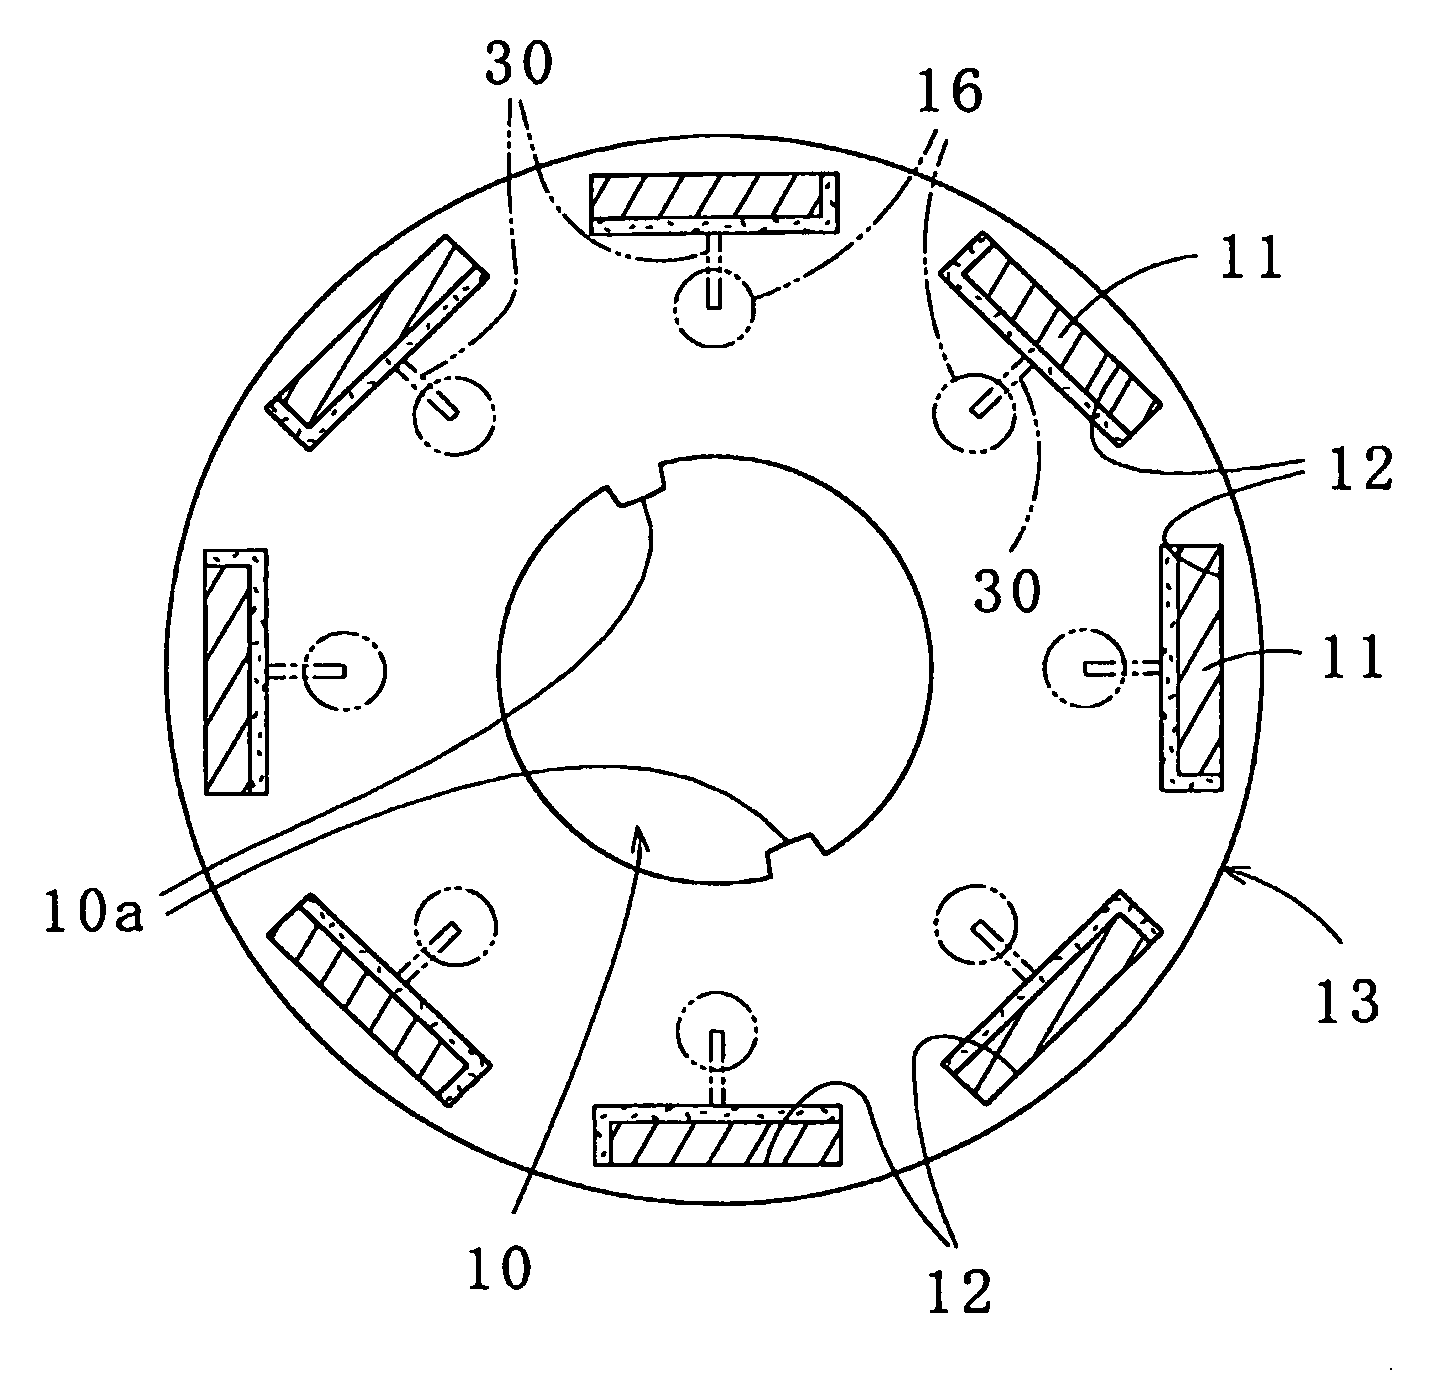 Method of Resin Sealing Permanent Magnets in Laminated Rotor Core